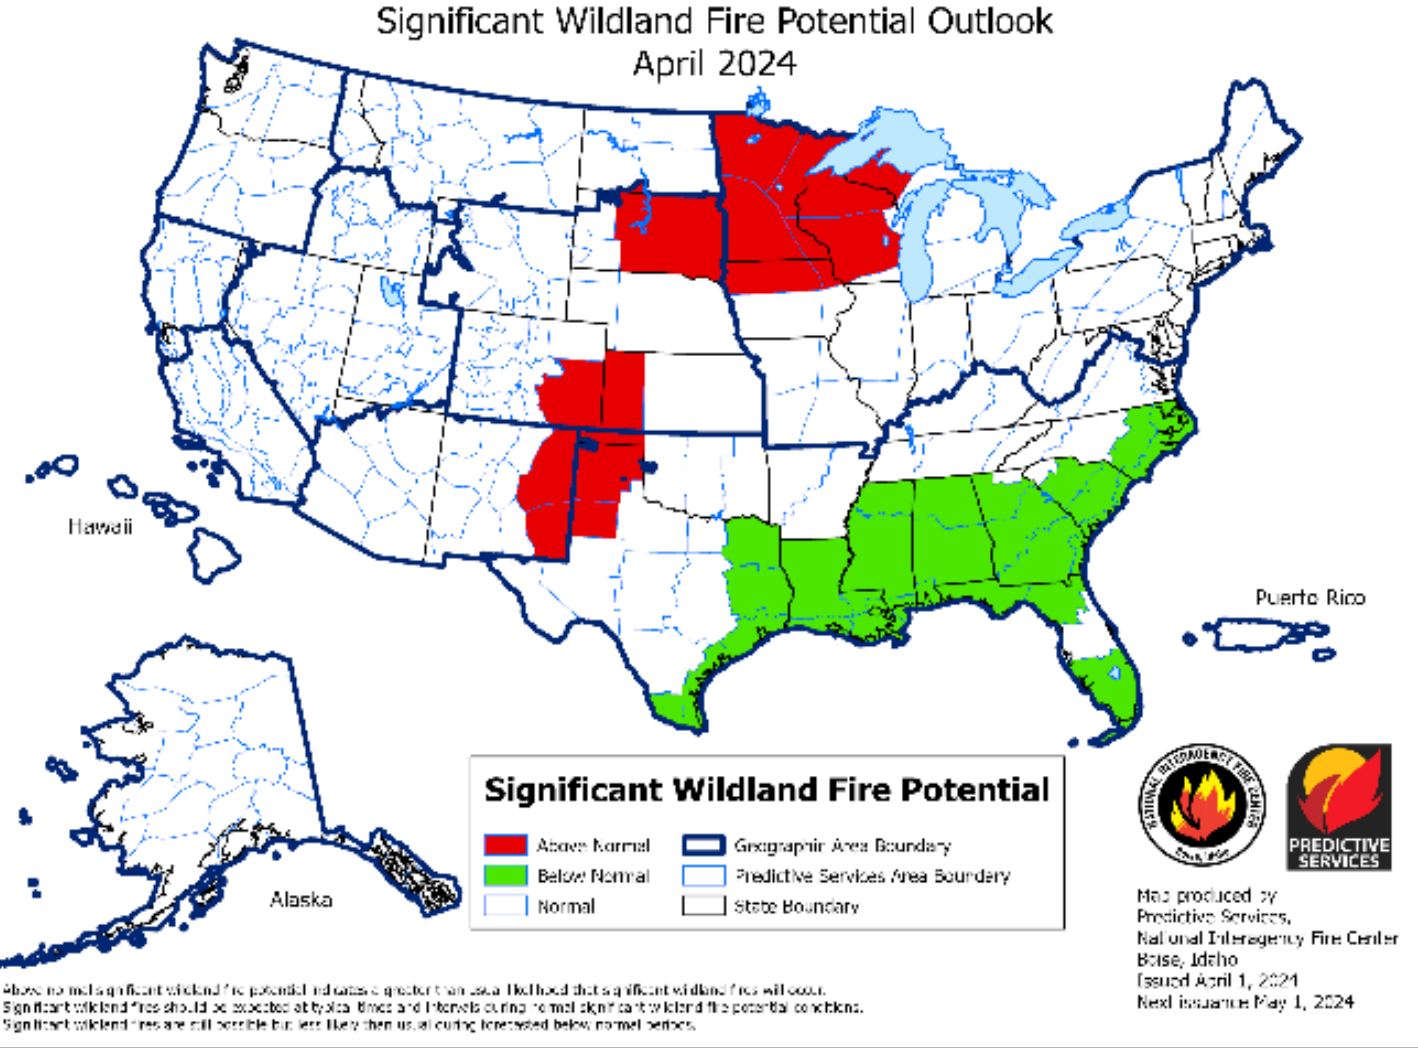 The wildfire potential outlook for April 2024. Red indicates above normal fire risk and green indicates below normal risk